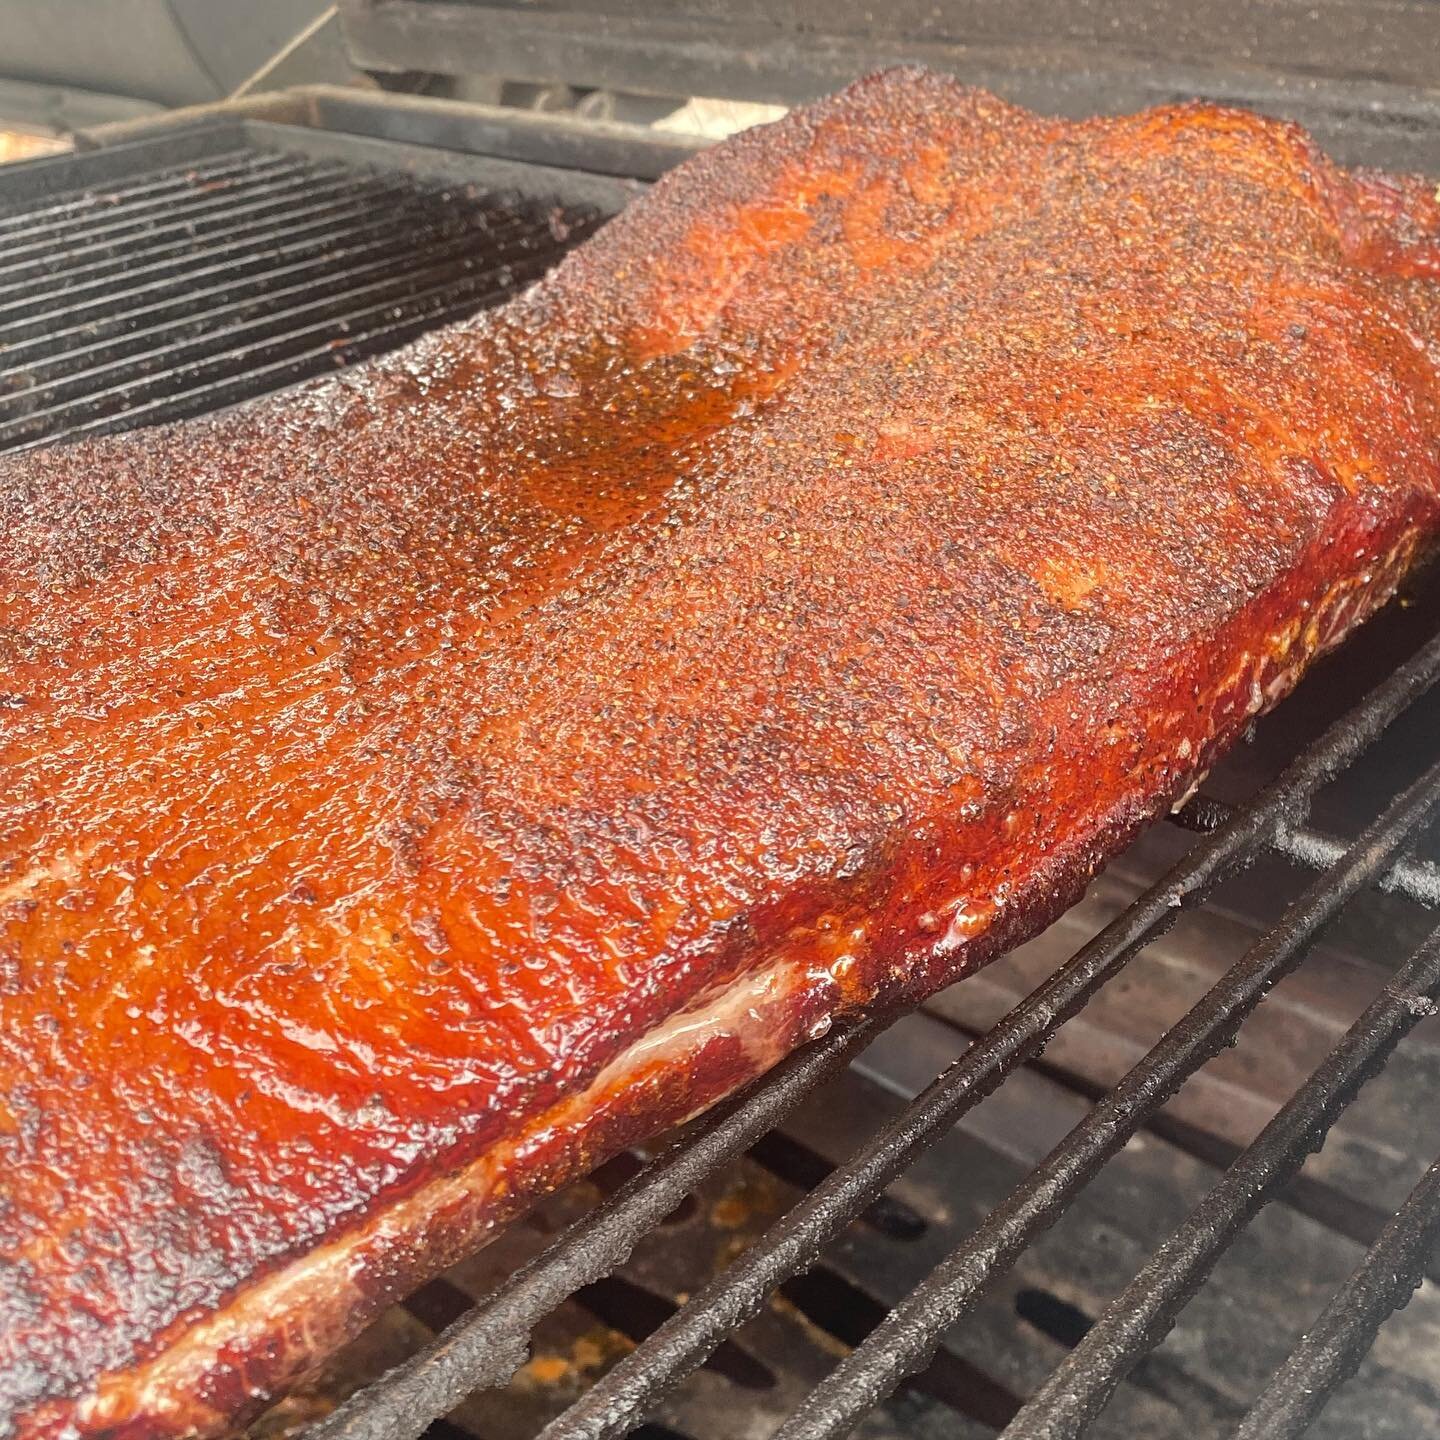 Look at that belly! 
.
.
#porkbelly #realbacon #mft #mftcatering #boisefood #boisefoodie #boisecatering #boisecaterer #smokedporkbelly #grill #grilling #charcoal